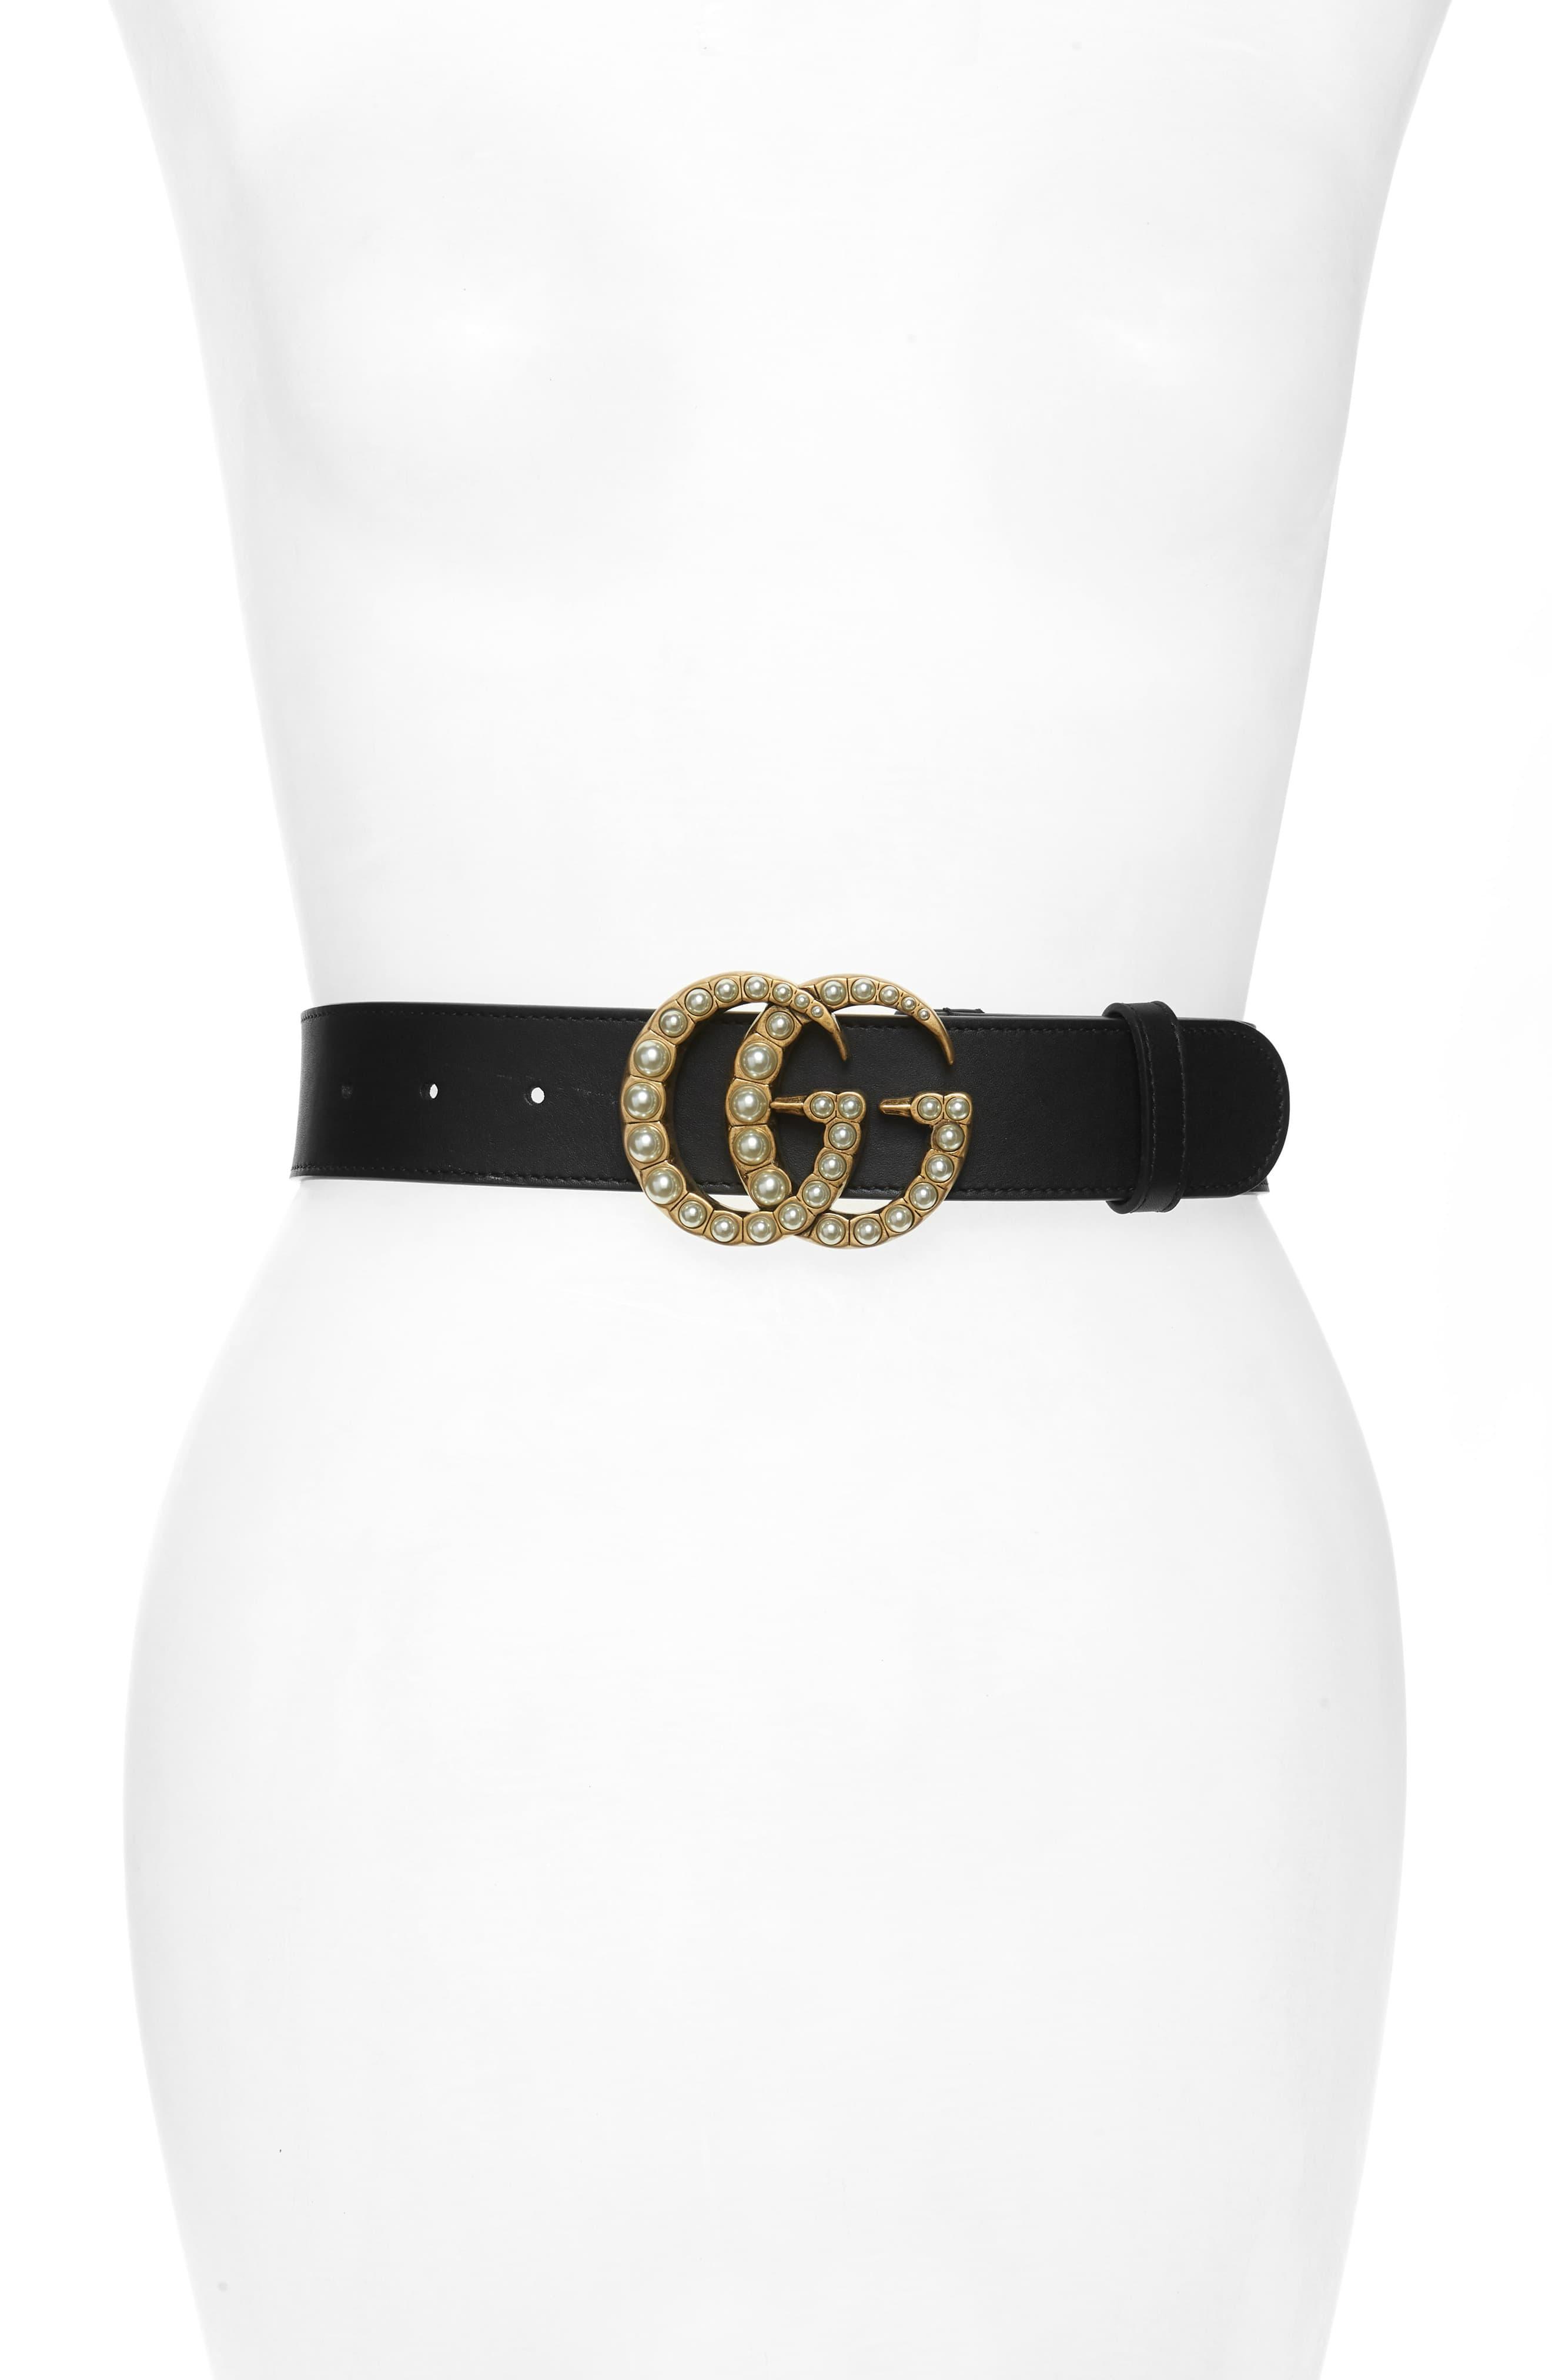 Beschrijving kraan functie Gucci Leather Belt With Pearl Double G Buckle in Black | Lyst